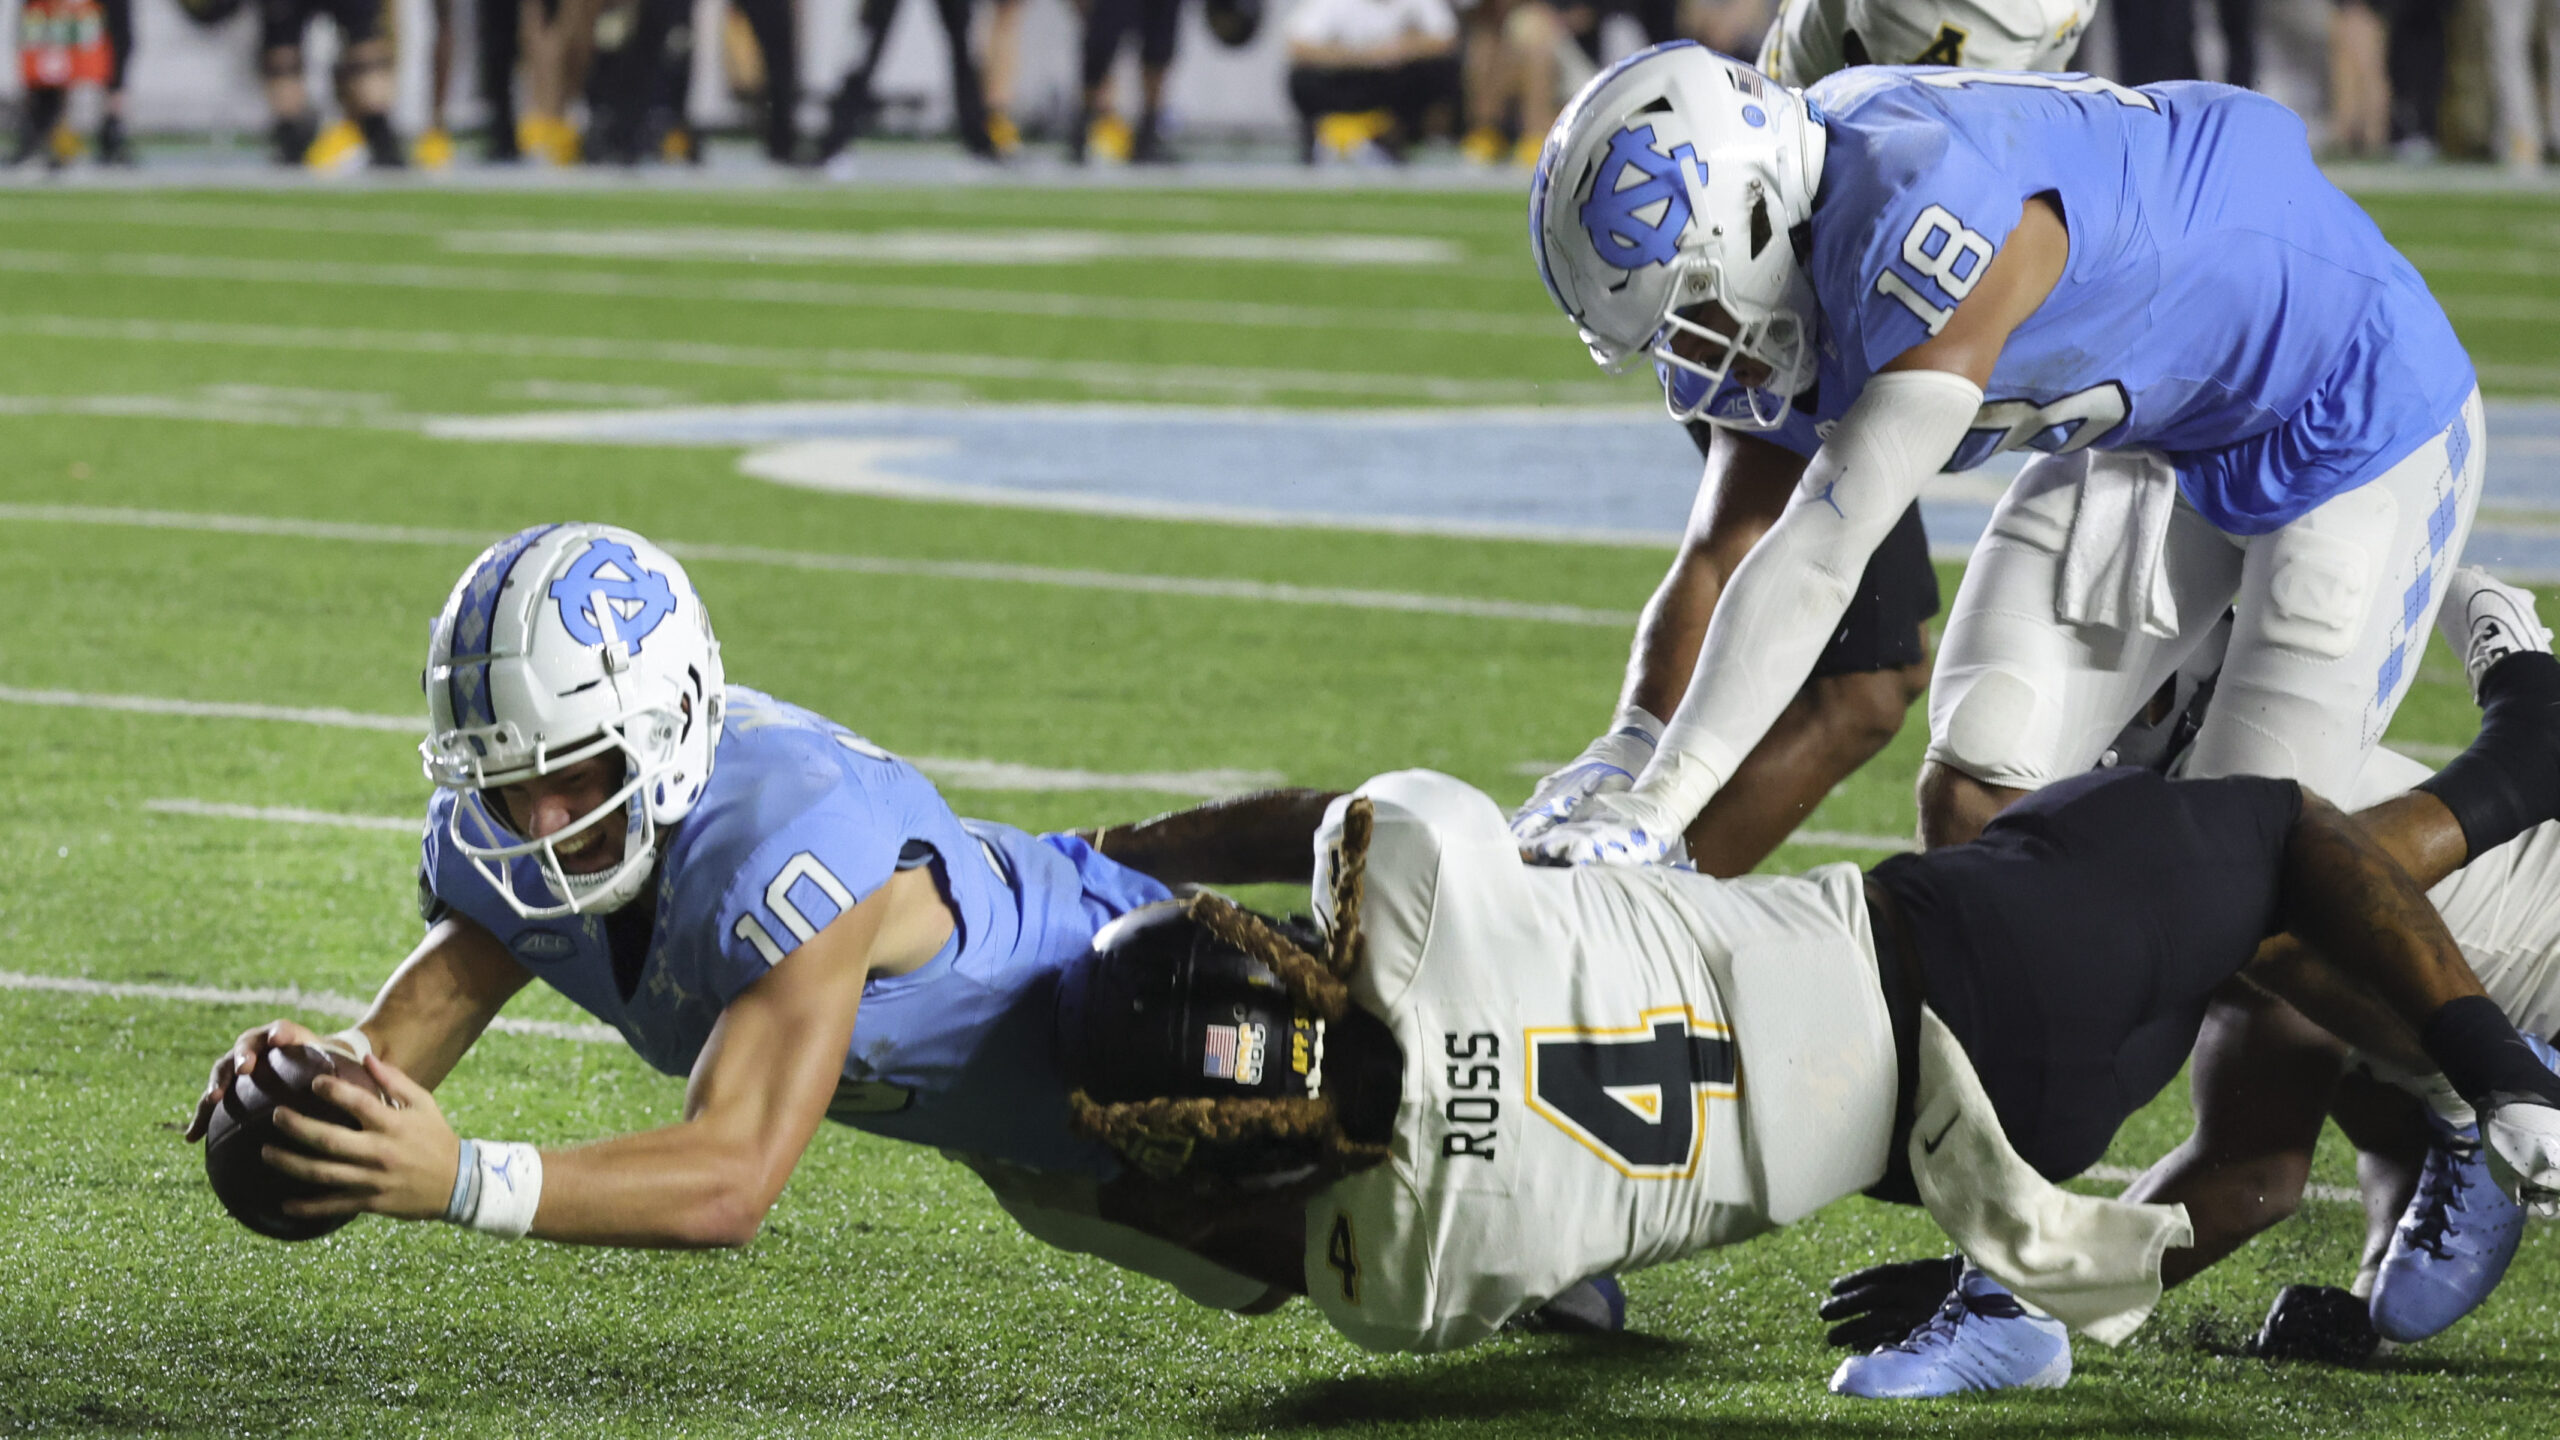 UNC Football Showcases Mental Toughness in Win Against App State